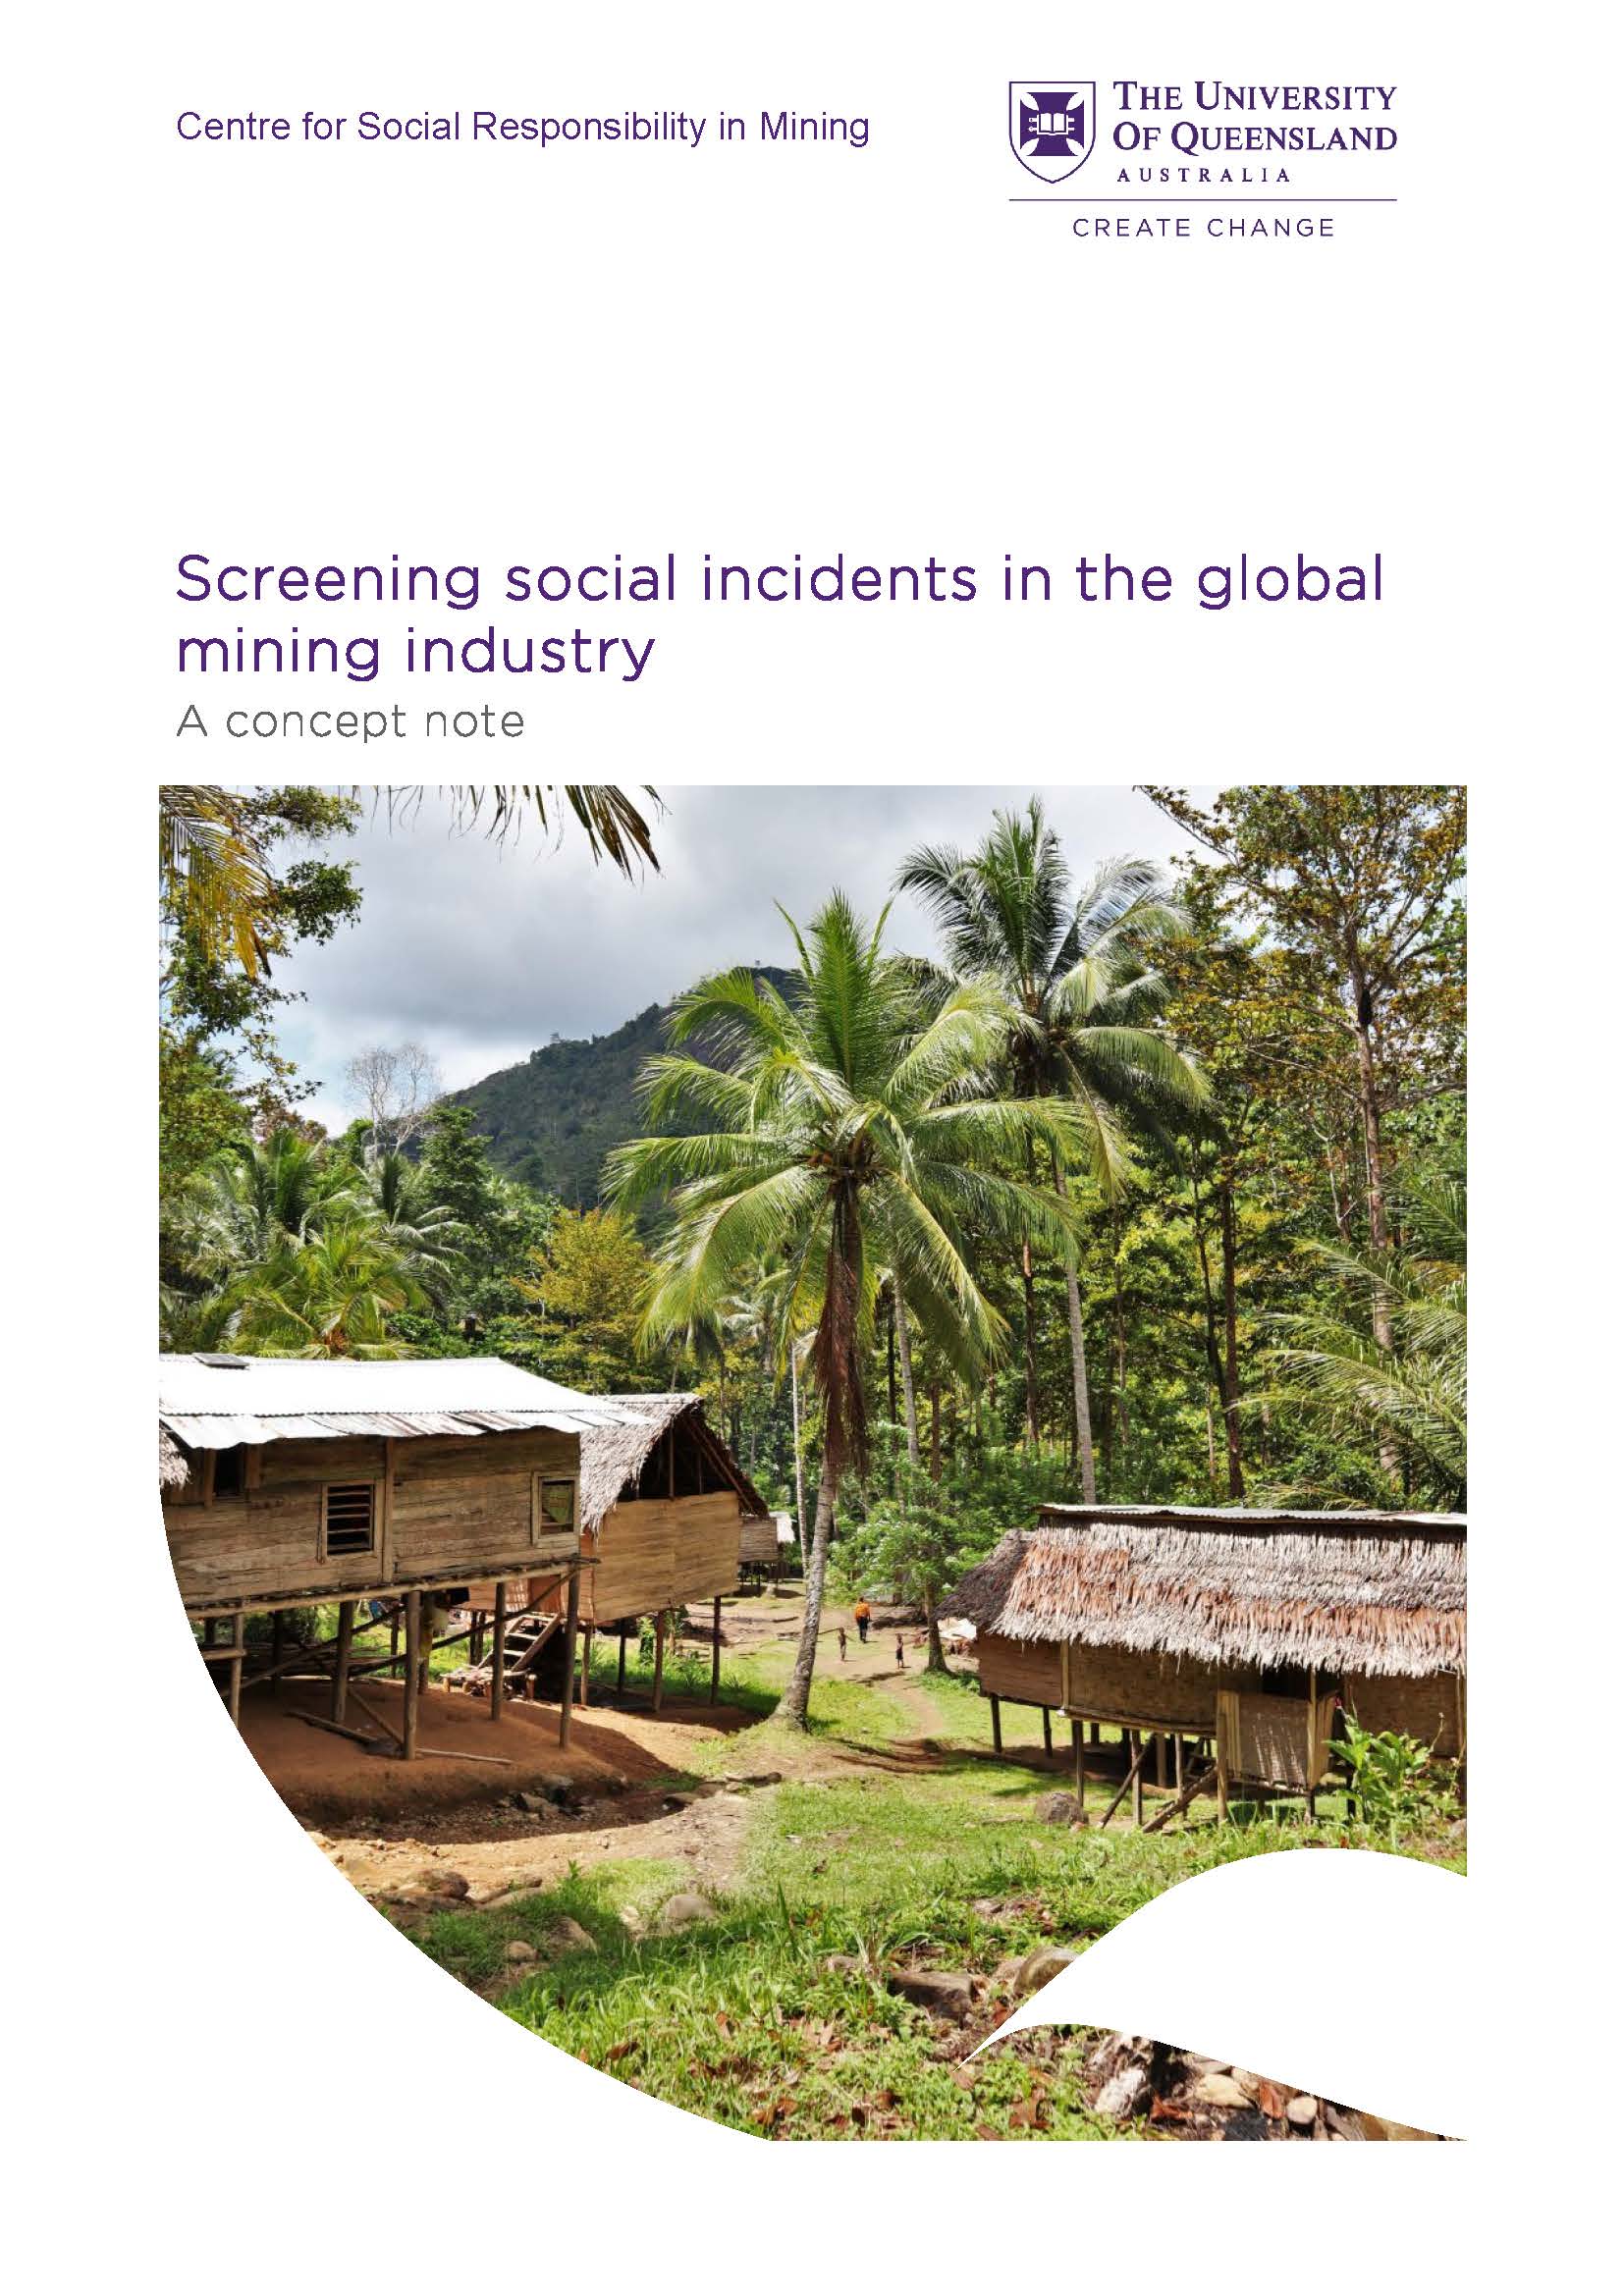 Screening social incidents in the global mining industry